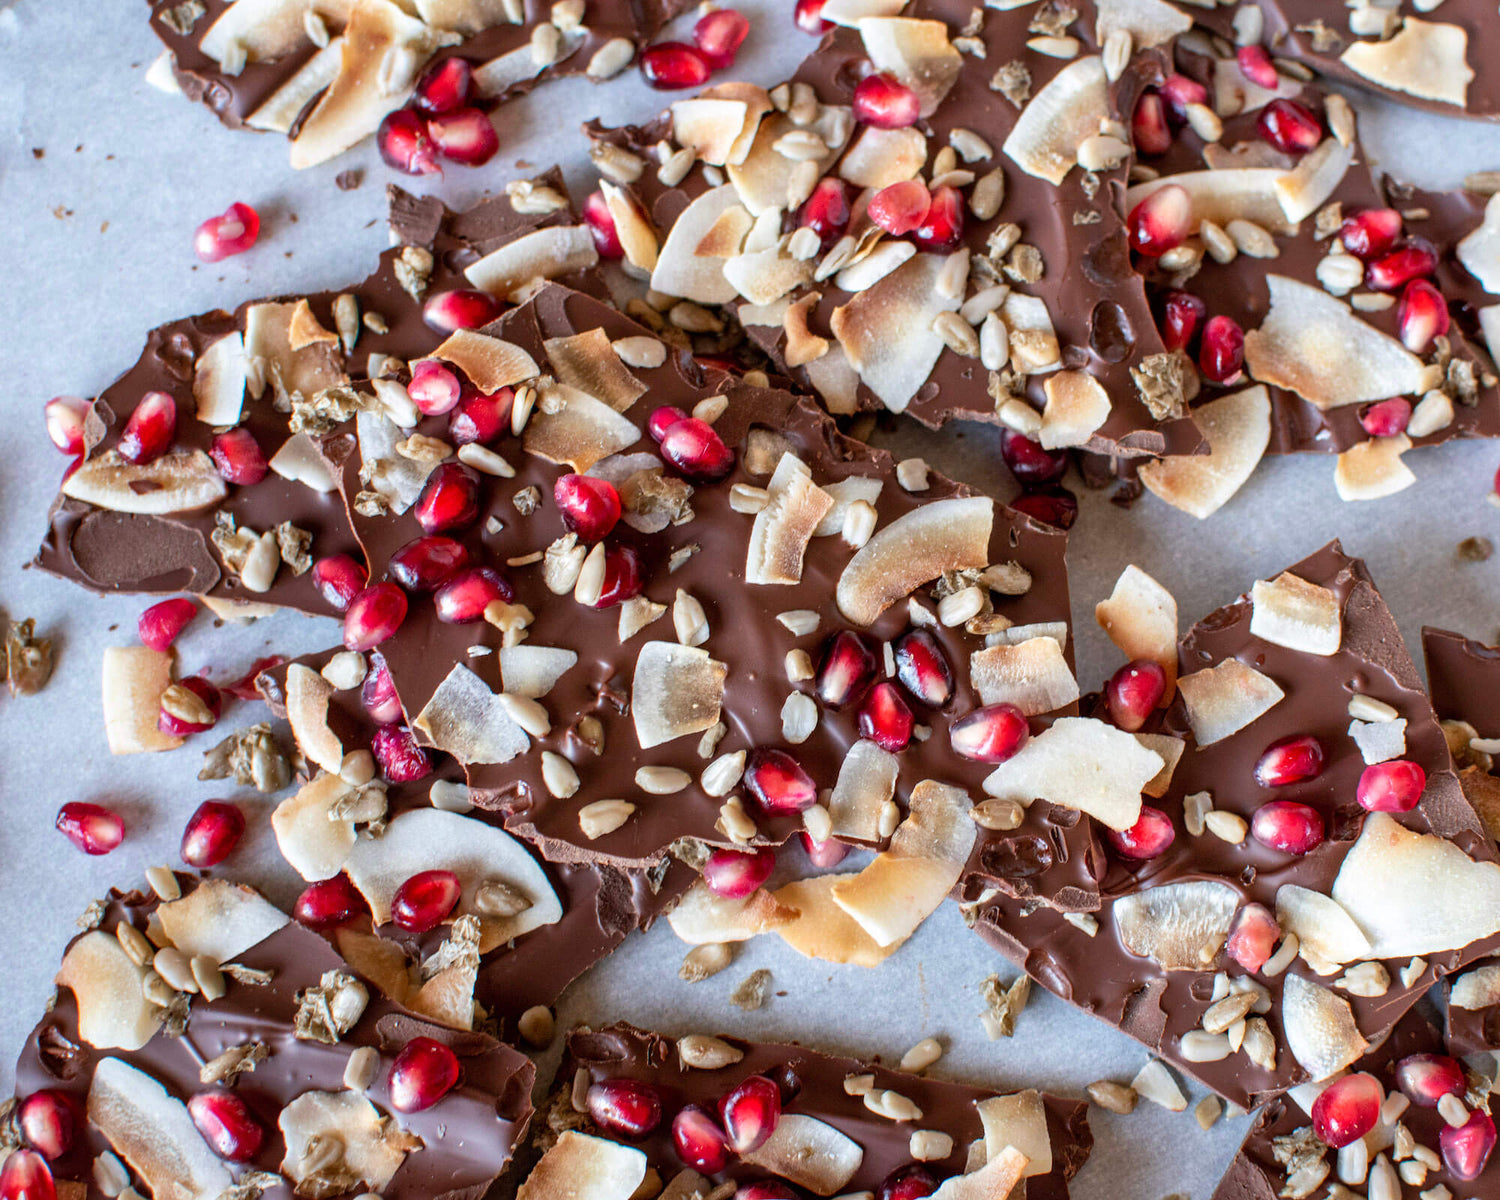 Coconut, Pomegranate, & Sprouted Sunflower Seed Chocolate Bark